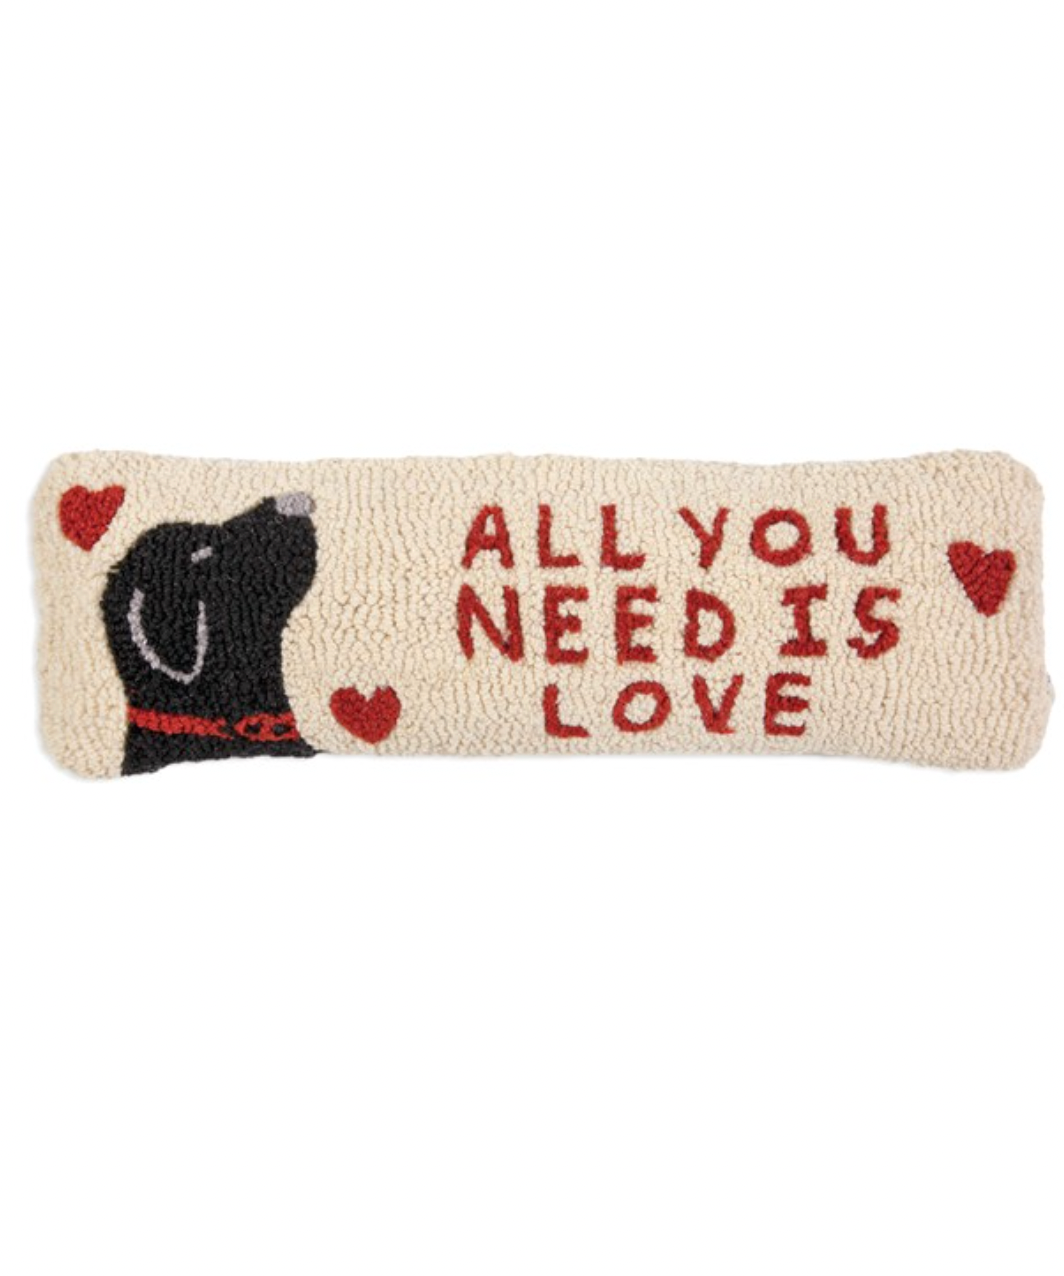 CHANDLER 4 CORNERS 8x24 Hook Pillow All You Need Is Love